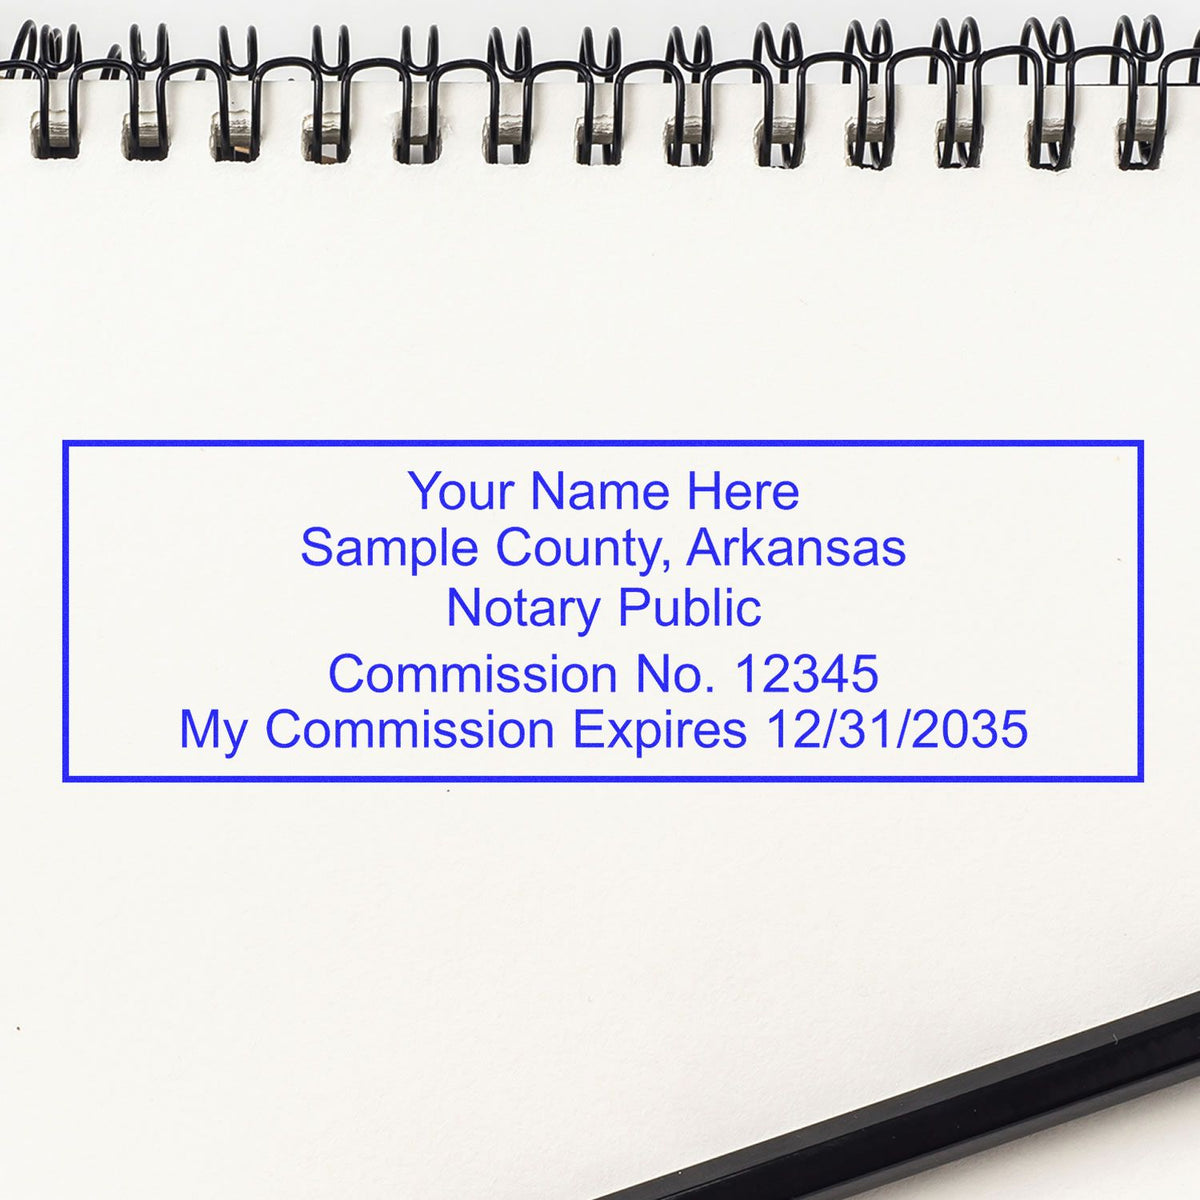 The Heavy-Duty Arkansas Rectangular Notary Stamp stamp impression comes to life with a crisp, detailed photo on paper - showcasing true professional quality.